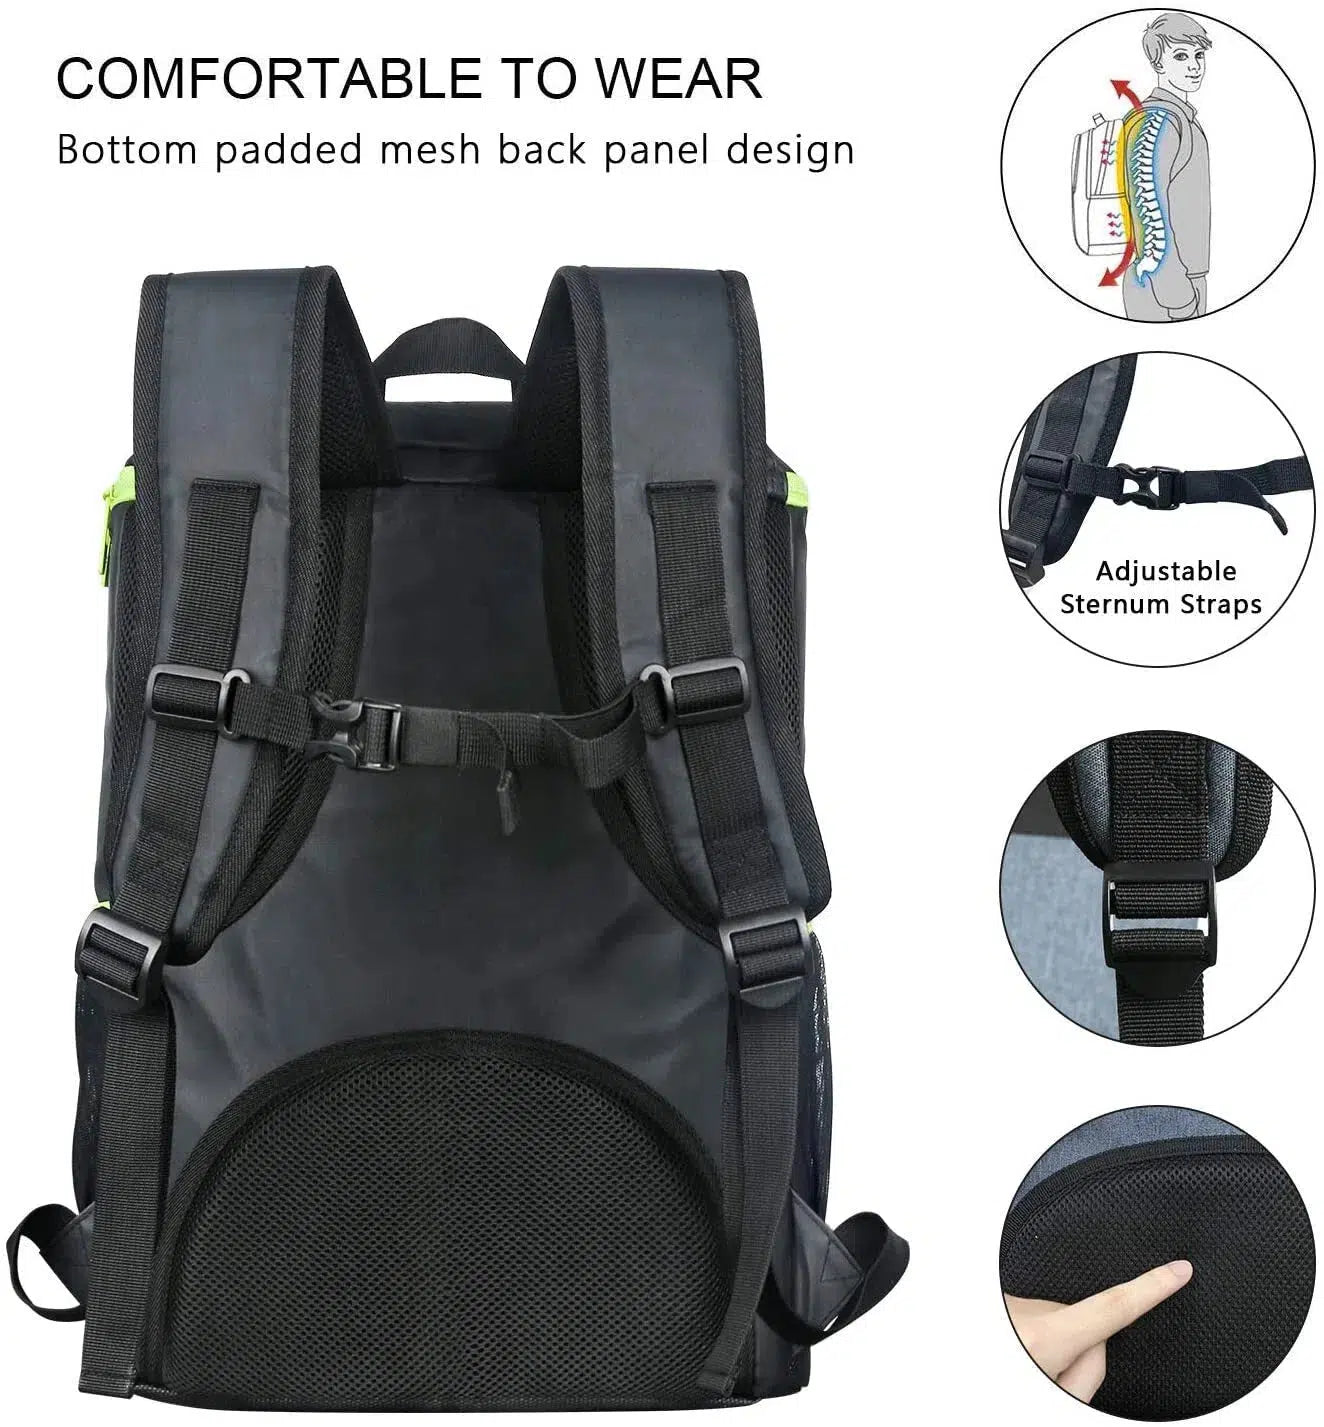 Hap Tim 30 Cans Leakproof Insulated Backpack Cooler Lightweight Soft Cooler Bag Backpack for Picnic, Camping, Hiking, Beach, Fishing, Day Trip or Lunch for Men Women (1002-BK)